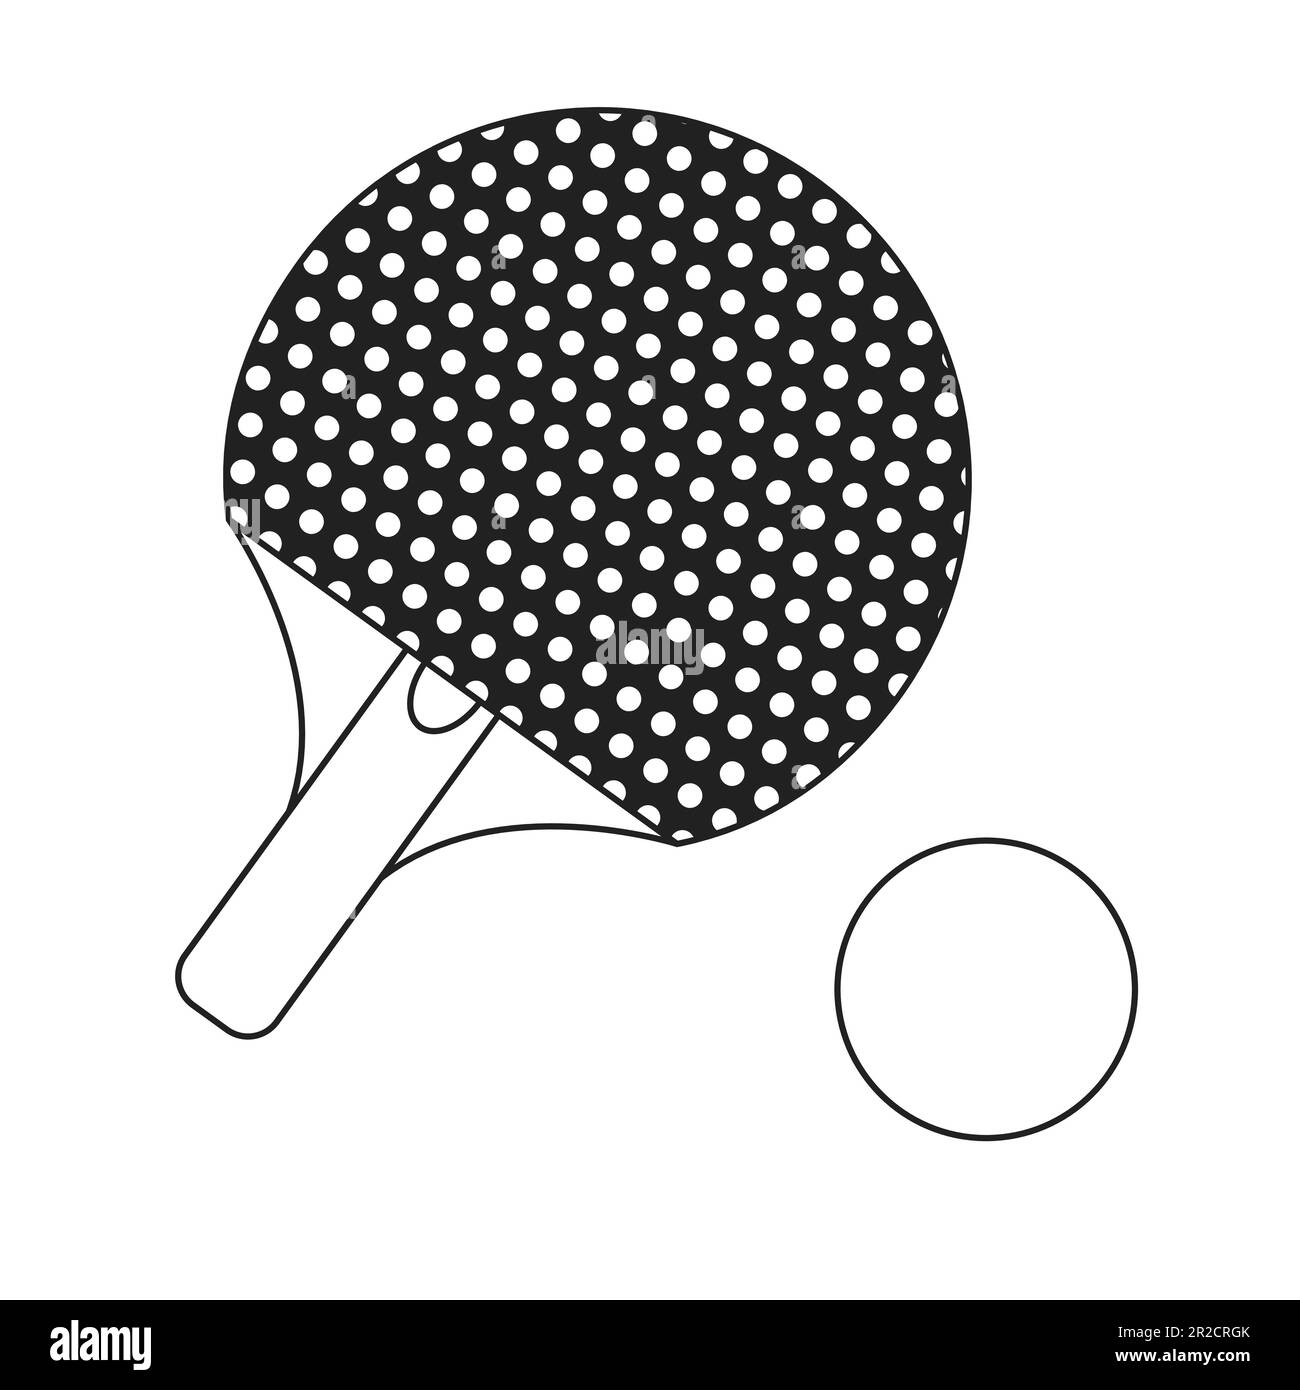 Ping pong paddle Black and White Stock Photos & Images - Alamy